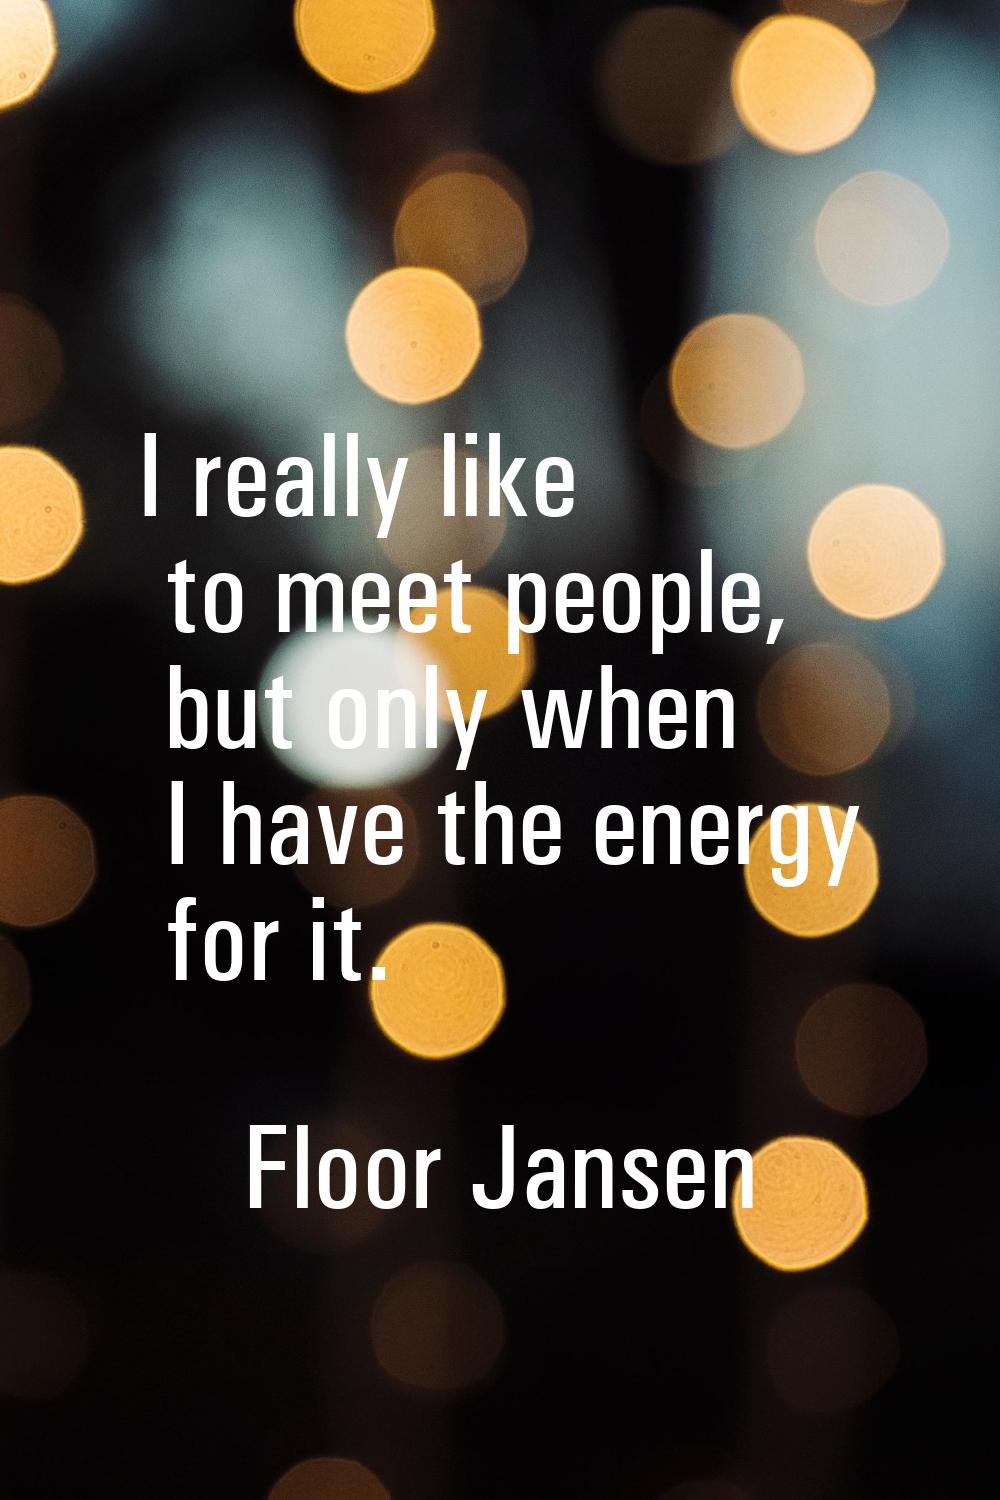 I really like to meet people, but only when I have the energy for it.